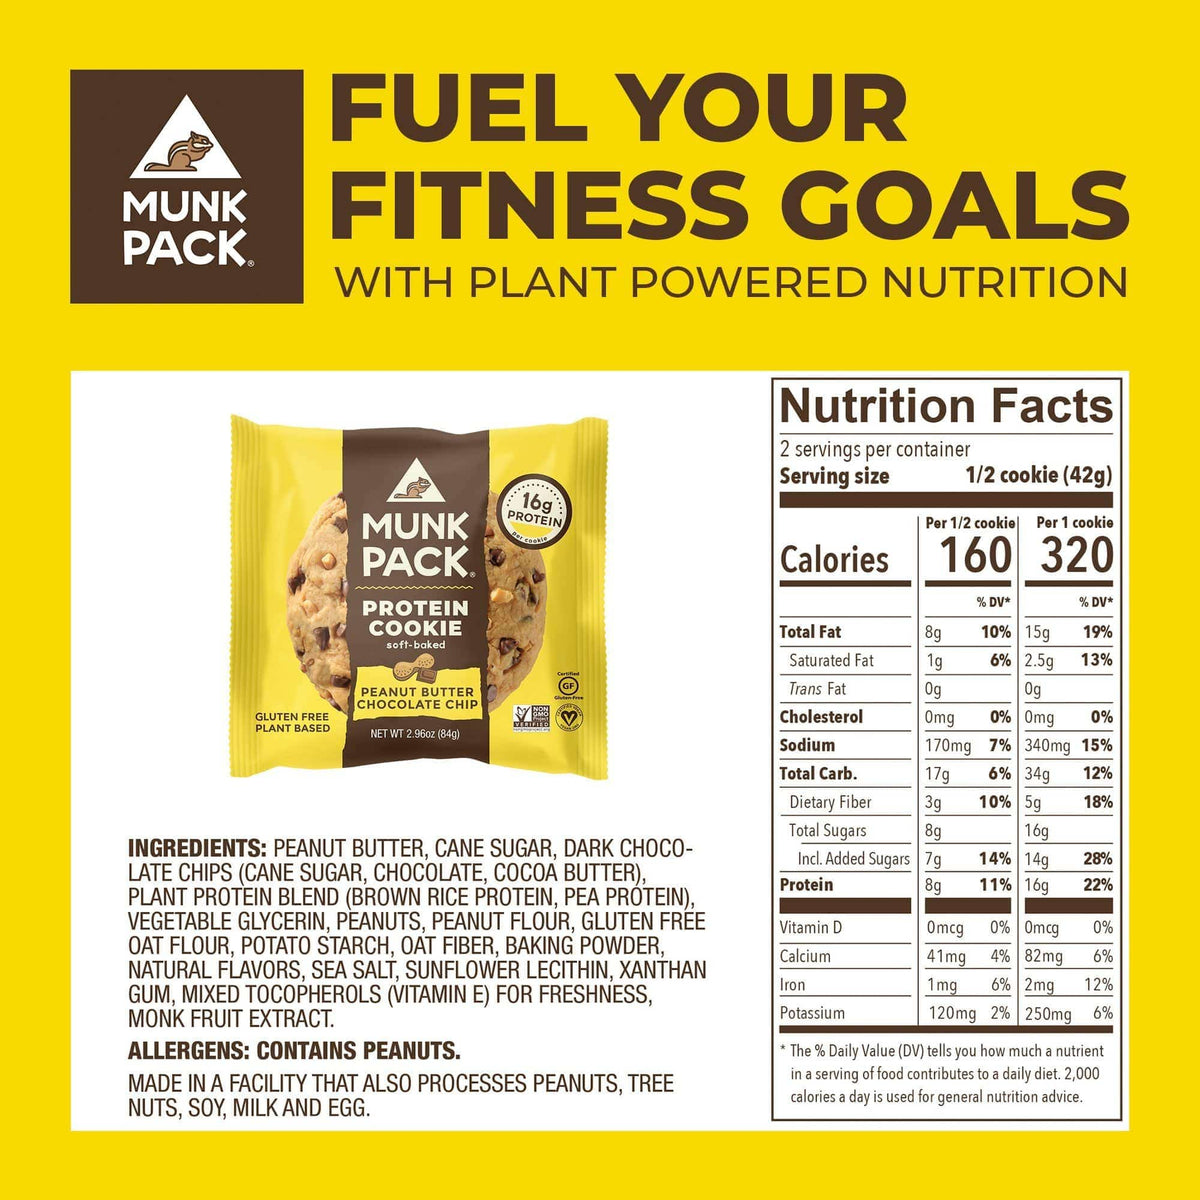 Peanut Butter Chocolate Chip Protein Cookie, 12-Pack exclusive at